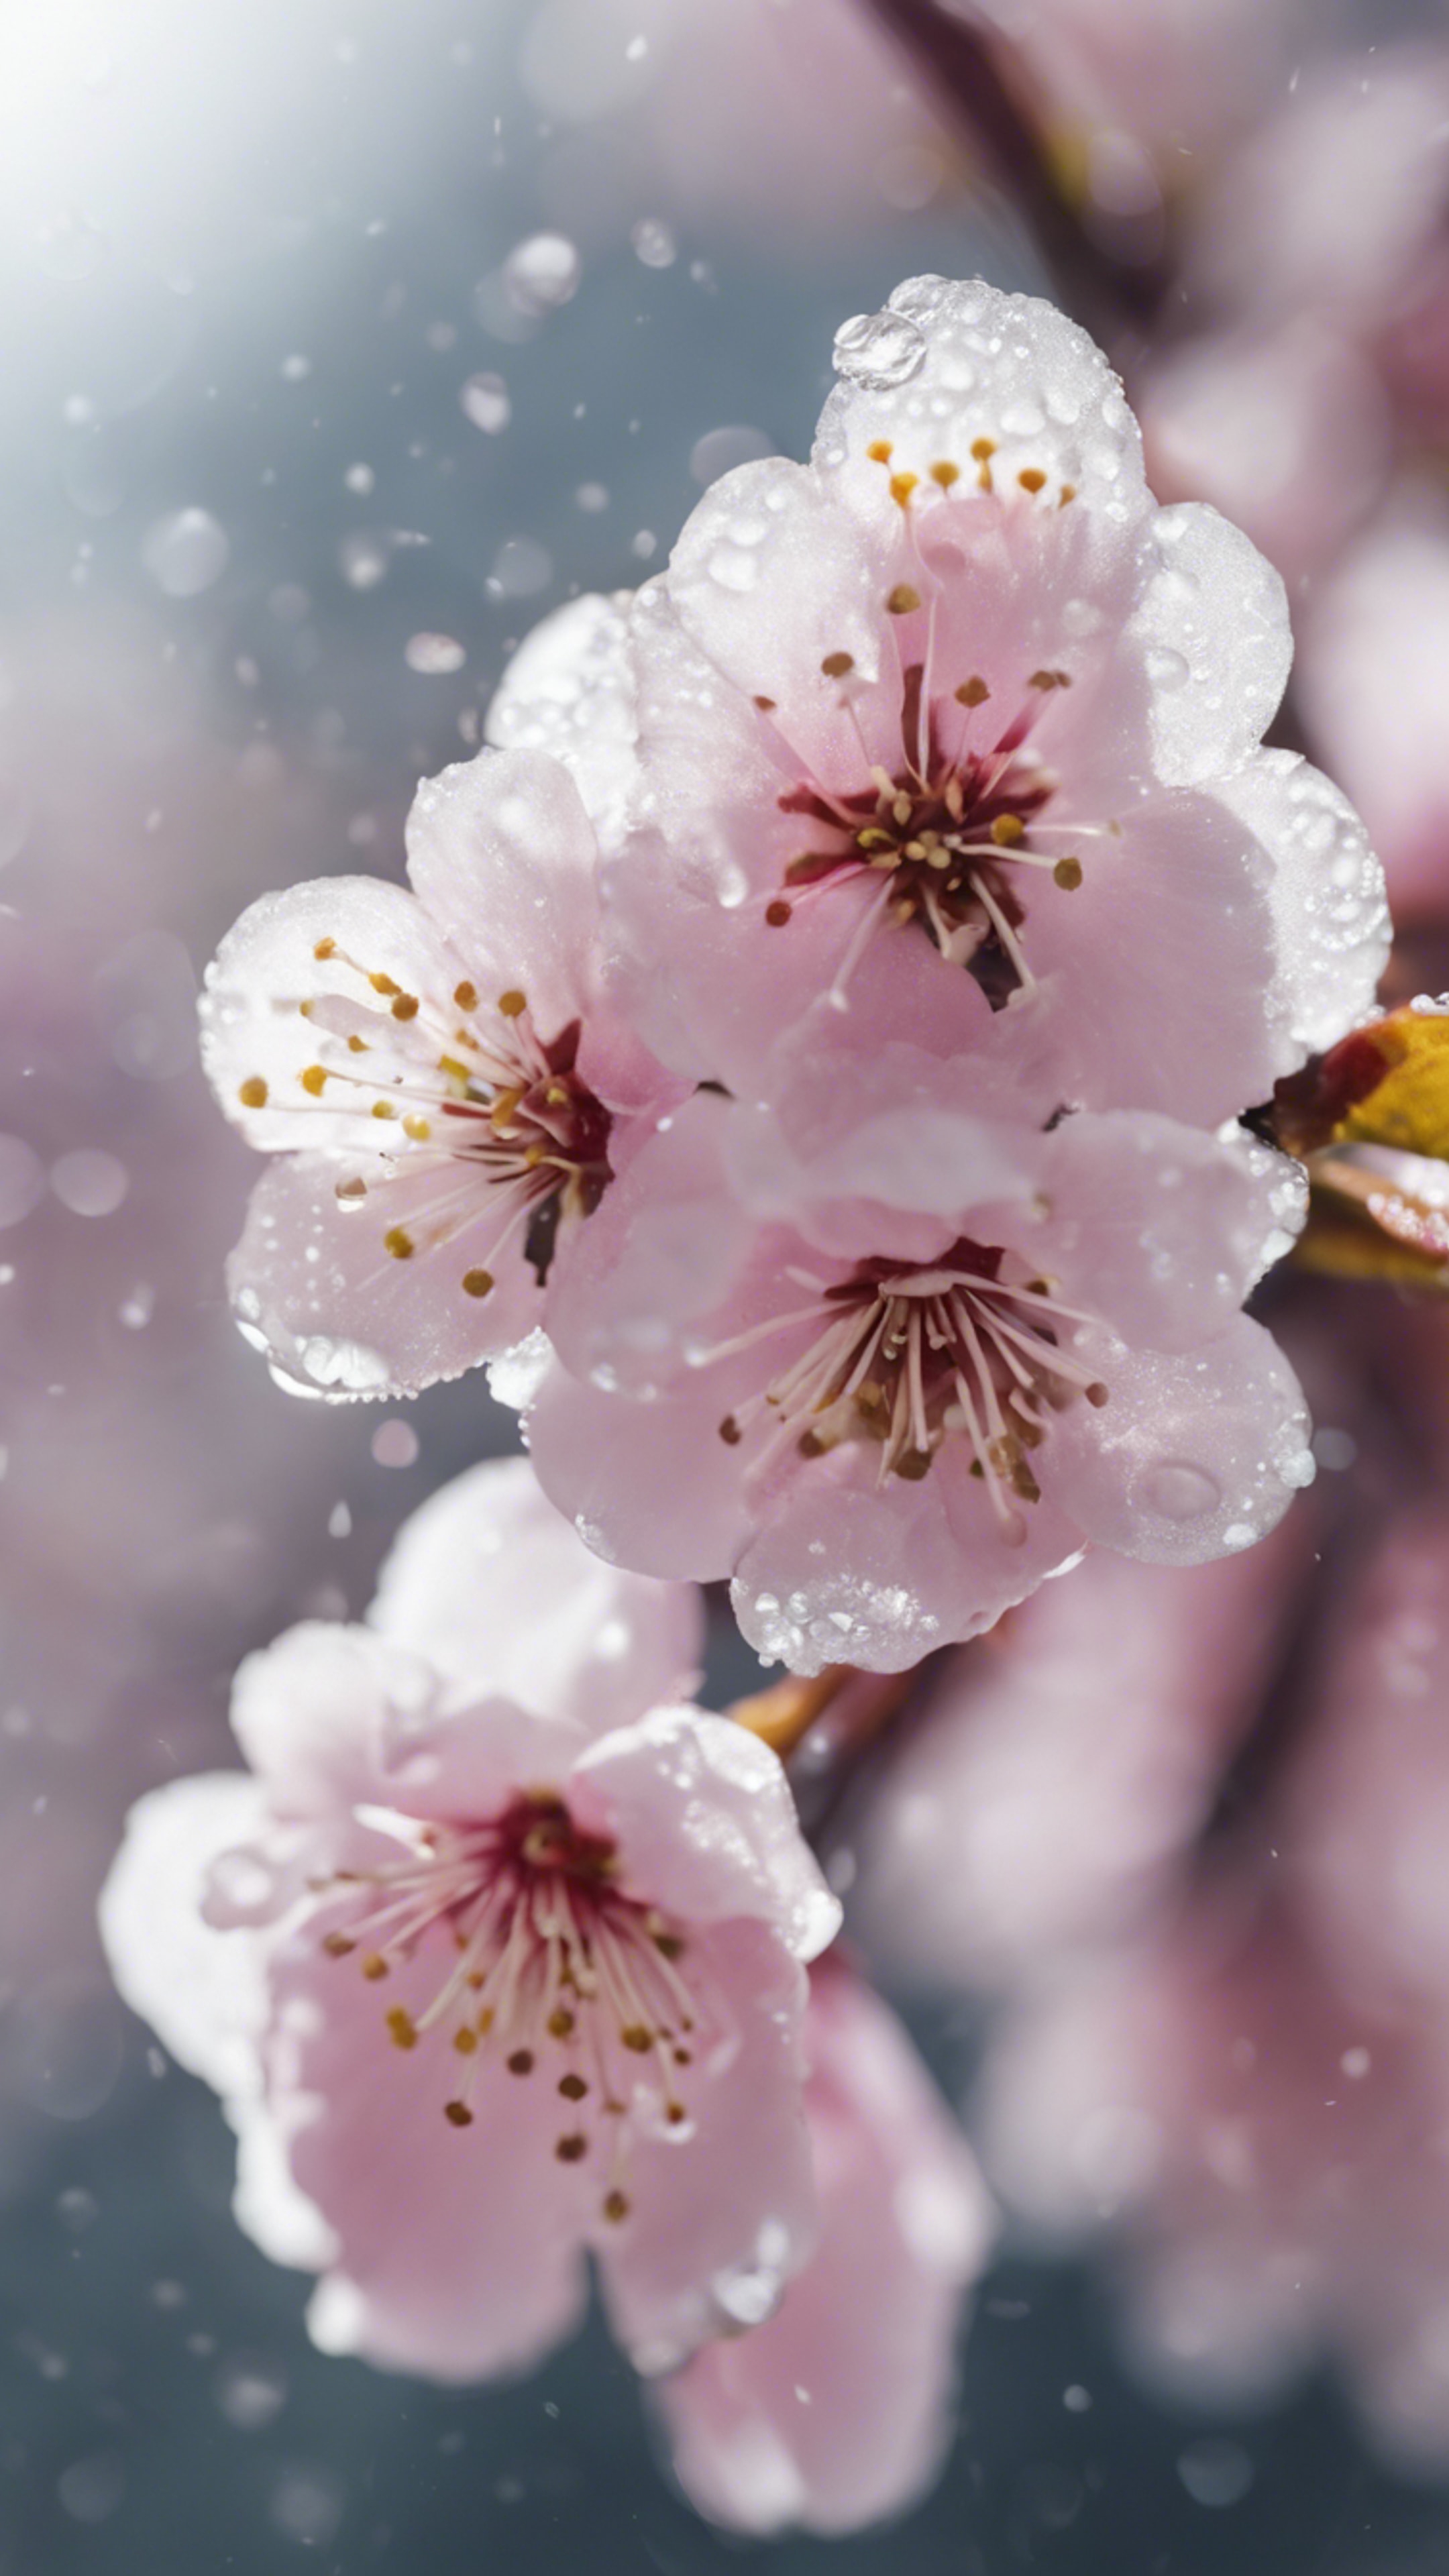 A closeup image of a freshly blooming cherry blossom, speckled with dew drops. Tapeta[d7e9cc65cc424f509aa2]